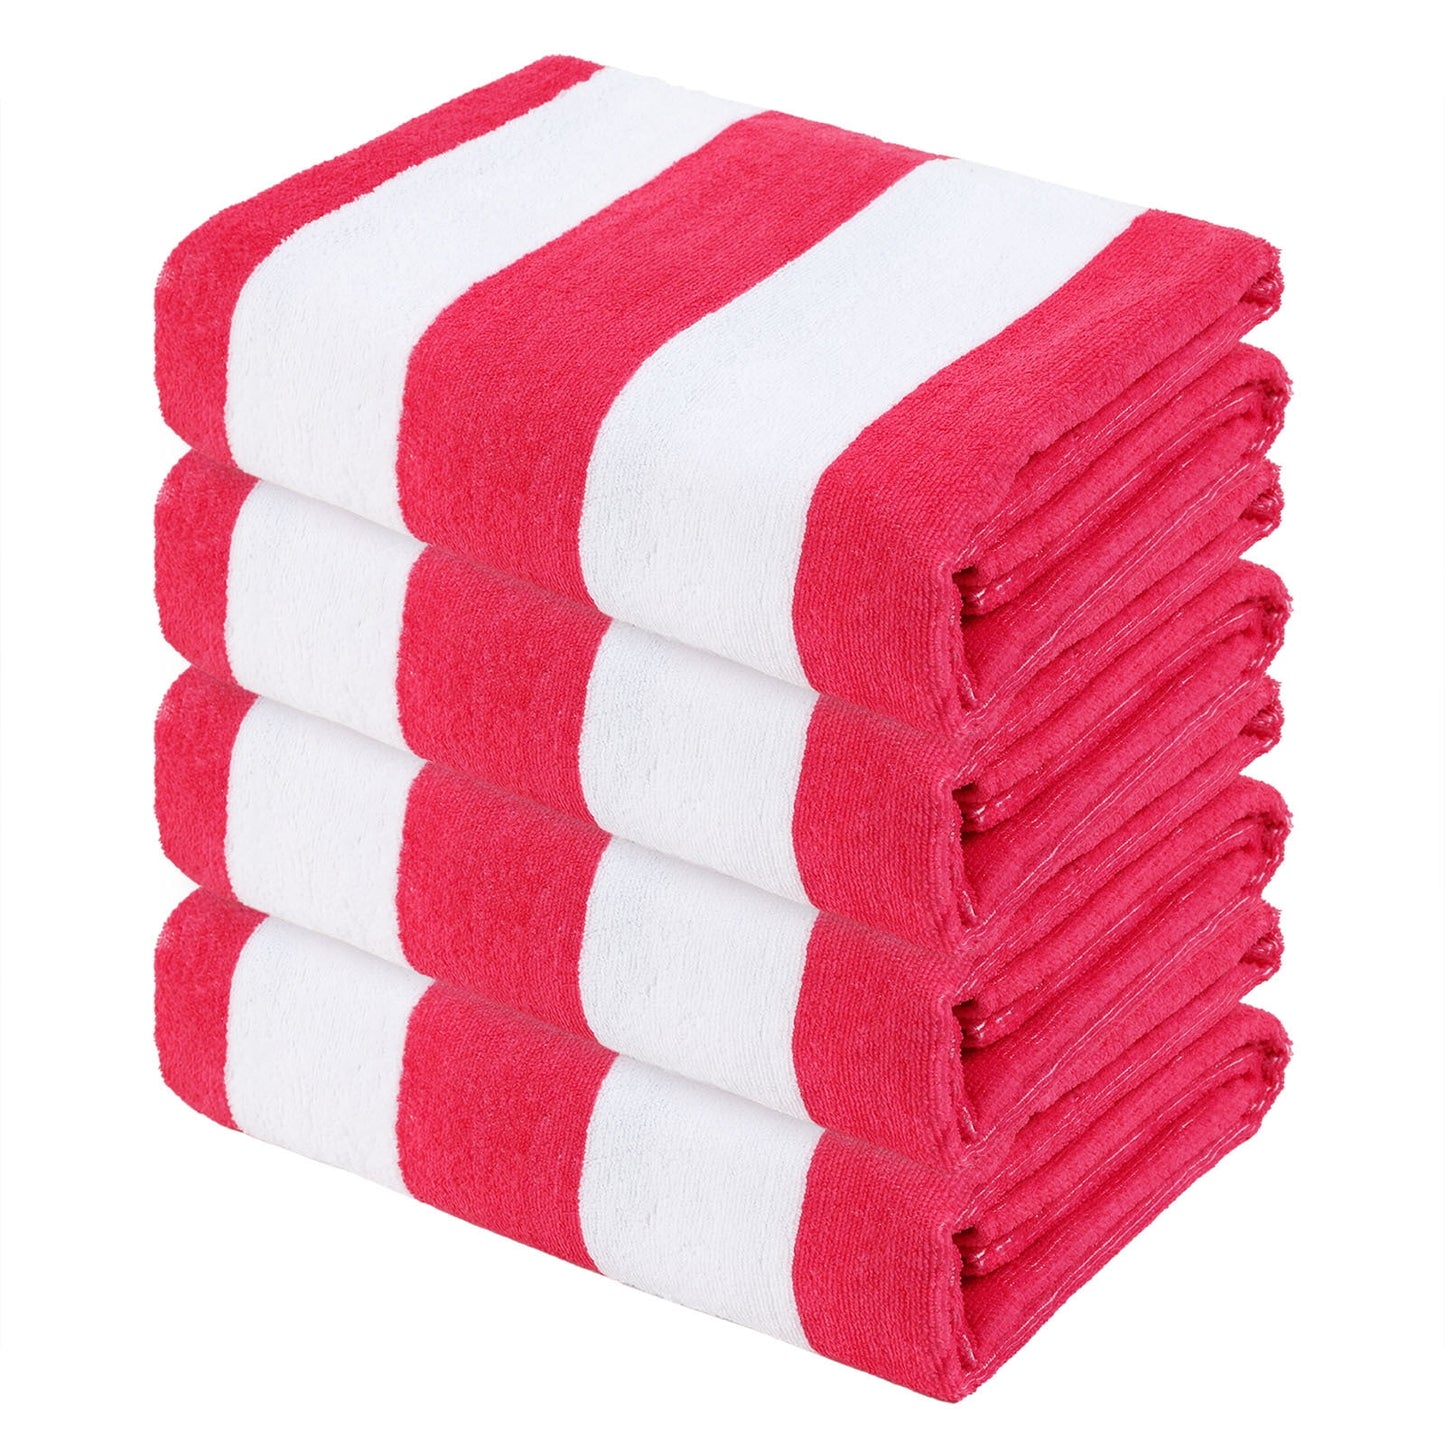 Exclusivo Mezcla 4 Pack Microfiber Cabana Striped Large Beach/Pool/Bath Towel for Adults (Pink, 30" x 60") - Soft, Quick Dry, Lightweight and Absorbent